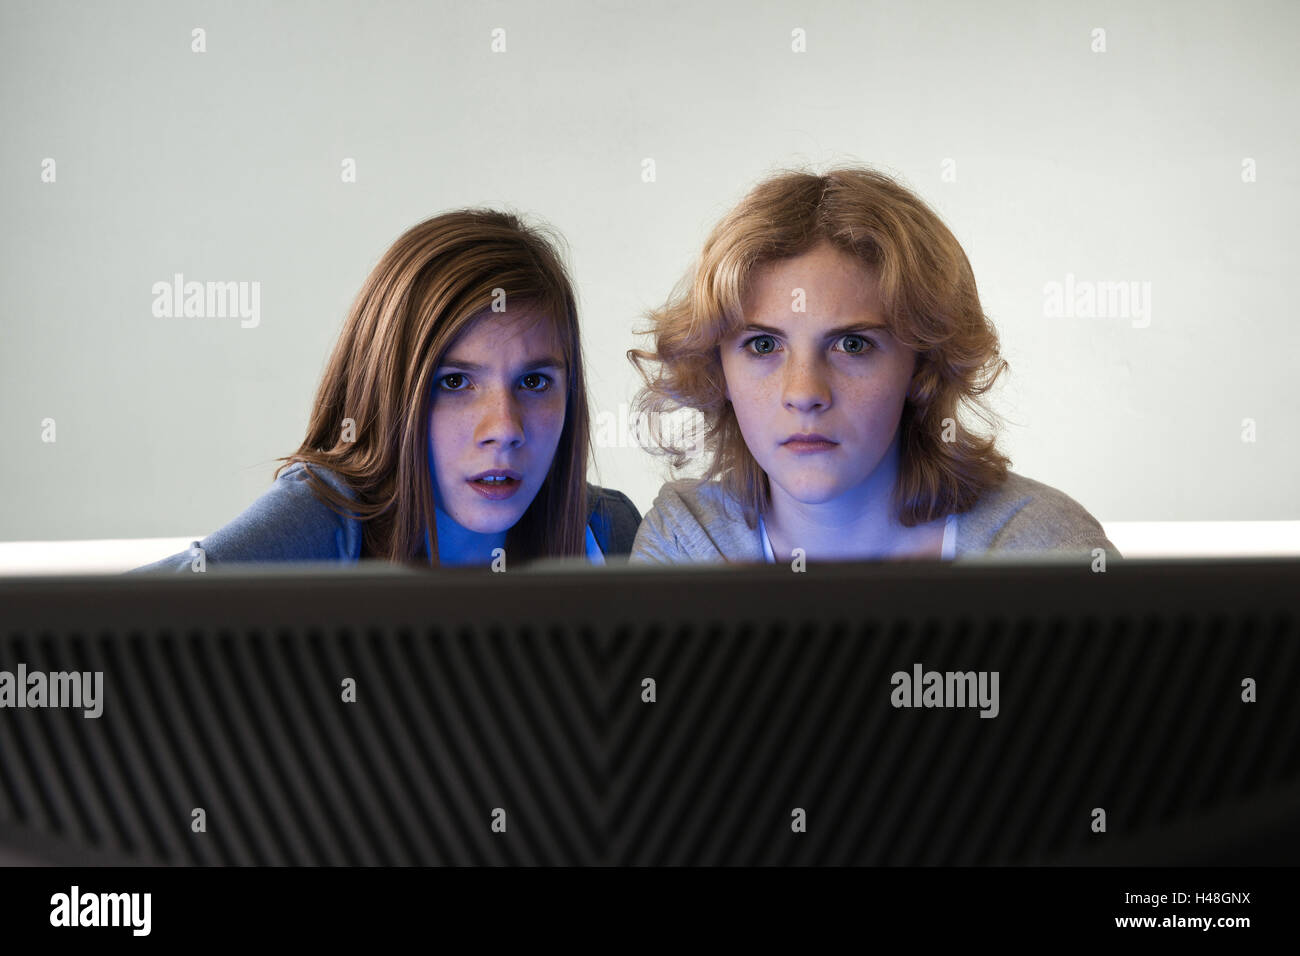 Two girls sit anxiously before a TV, Stock Photo